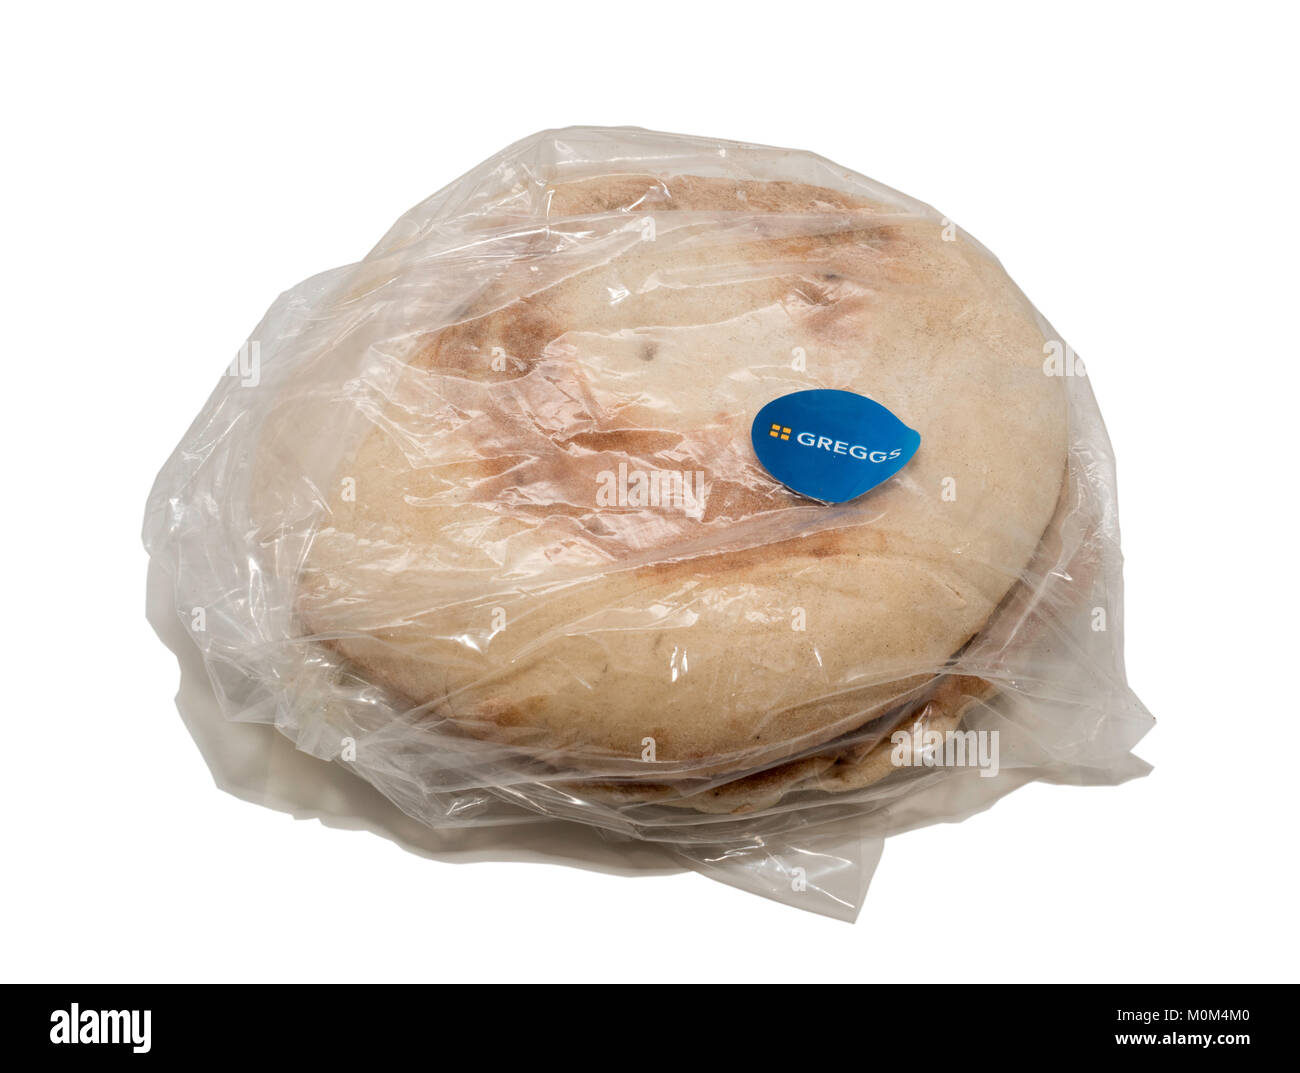 https://c8.alamy.com/comp/M0M4M0/two-greggs-stottie-cakes-wrapped-in-a-plastic-bag-north-east-england-M0M4M0.jpg